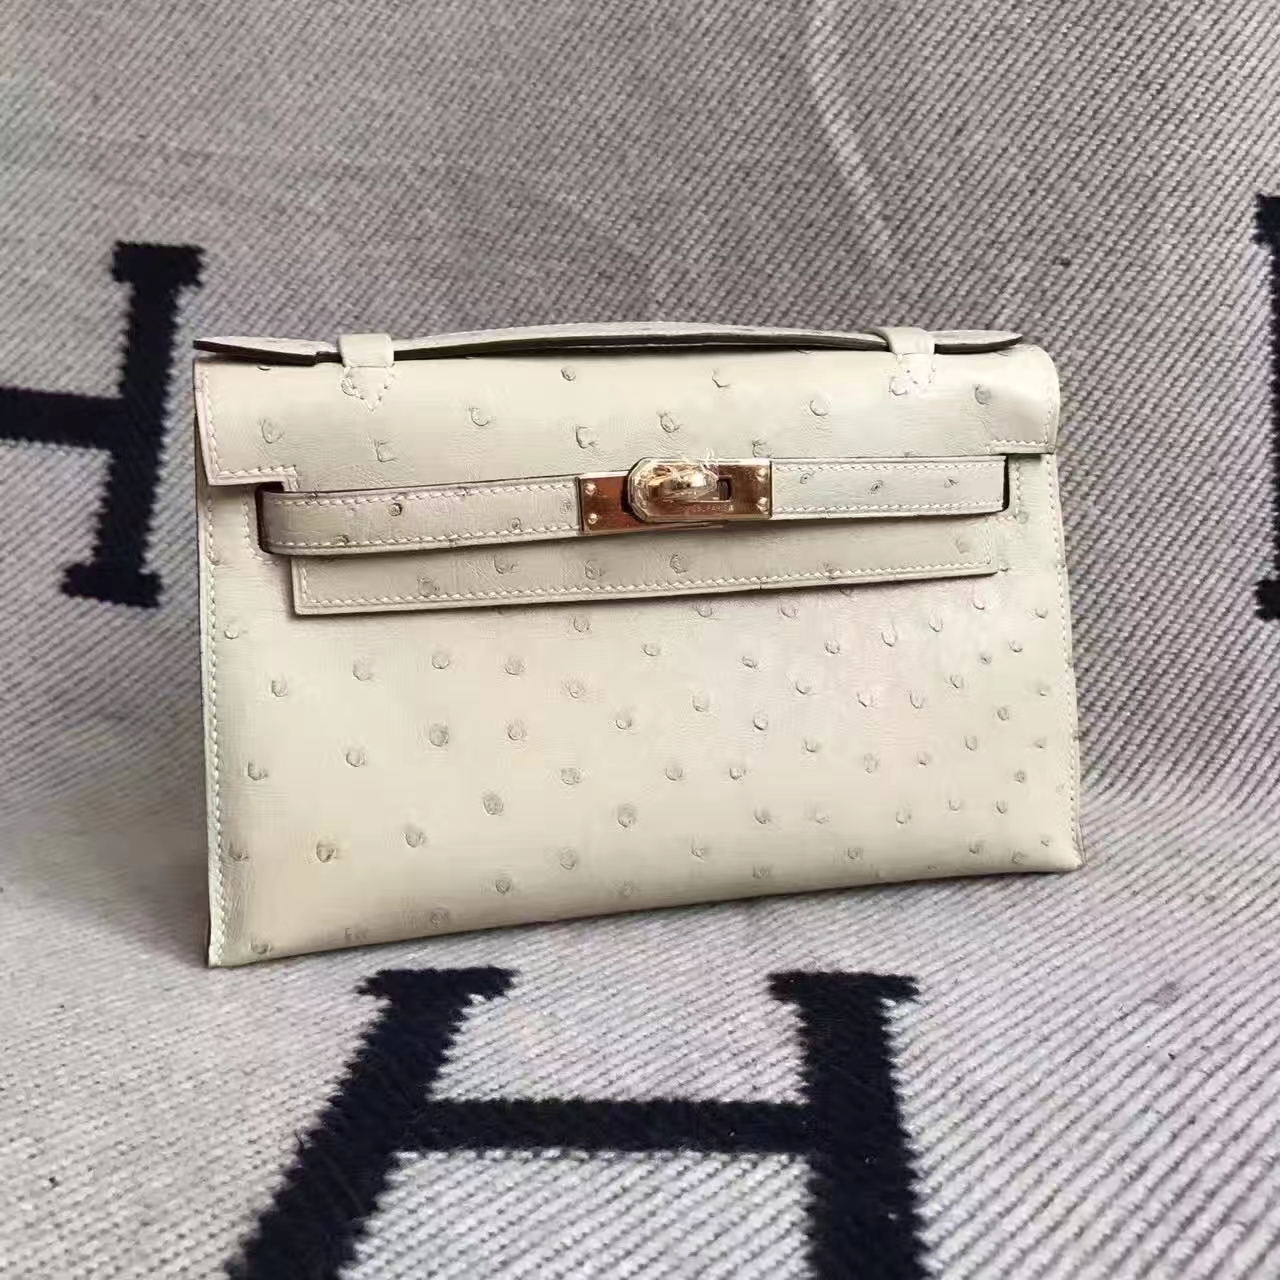 Wholesale Hermes Wool White Ostrich Leather Minikelly Clutch Bag 22cm